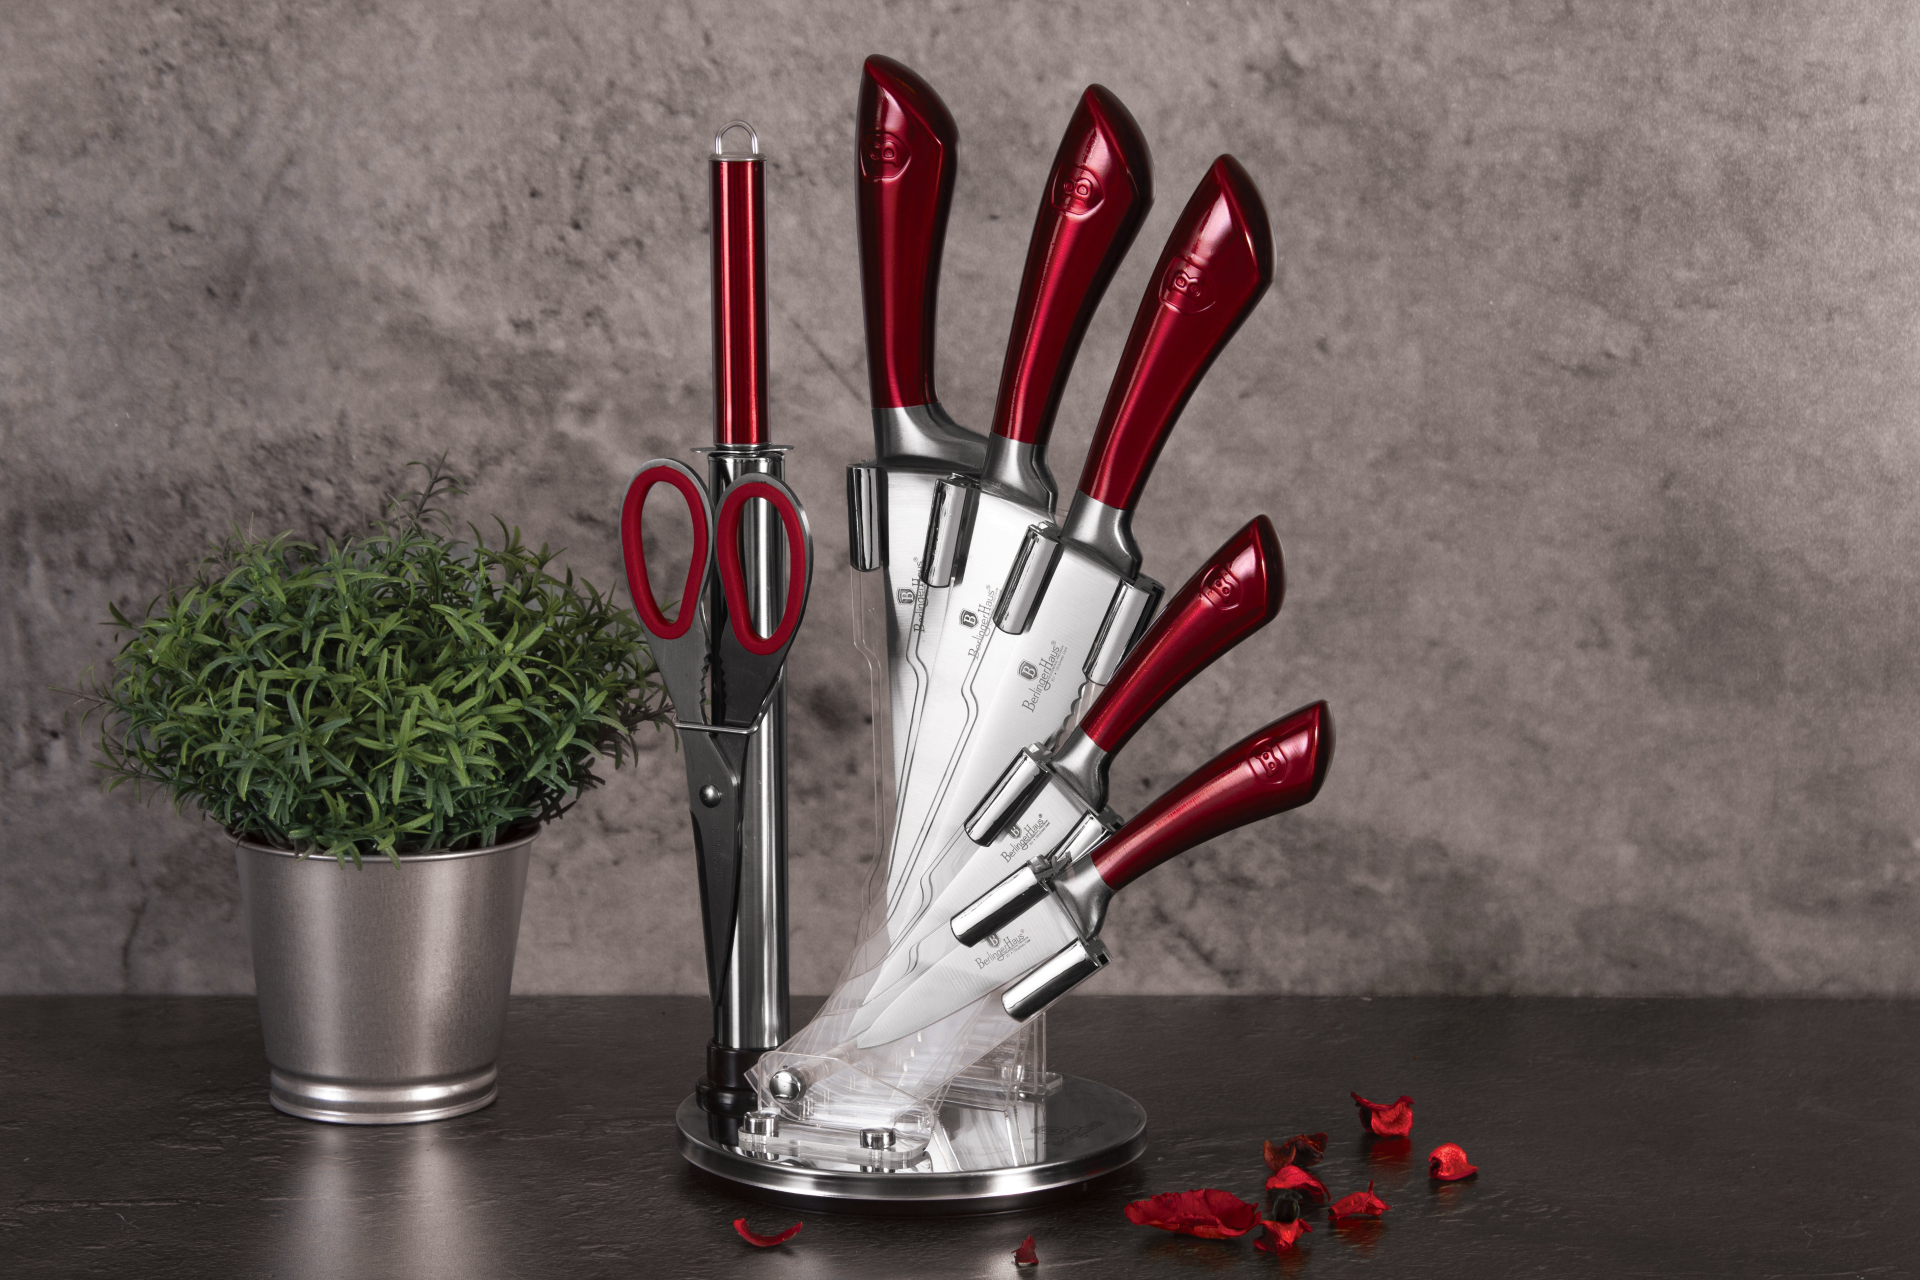 8-Piece Knife Set w/ Acrylic Stand Burgundy Collection